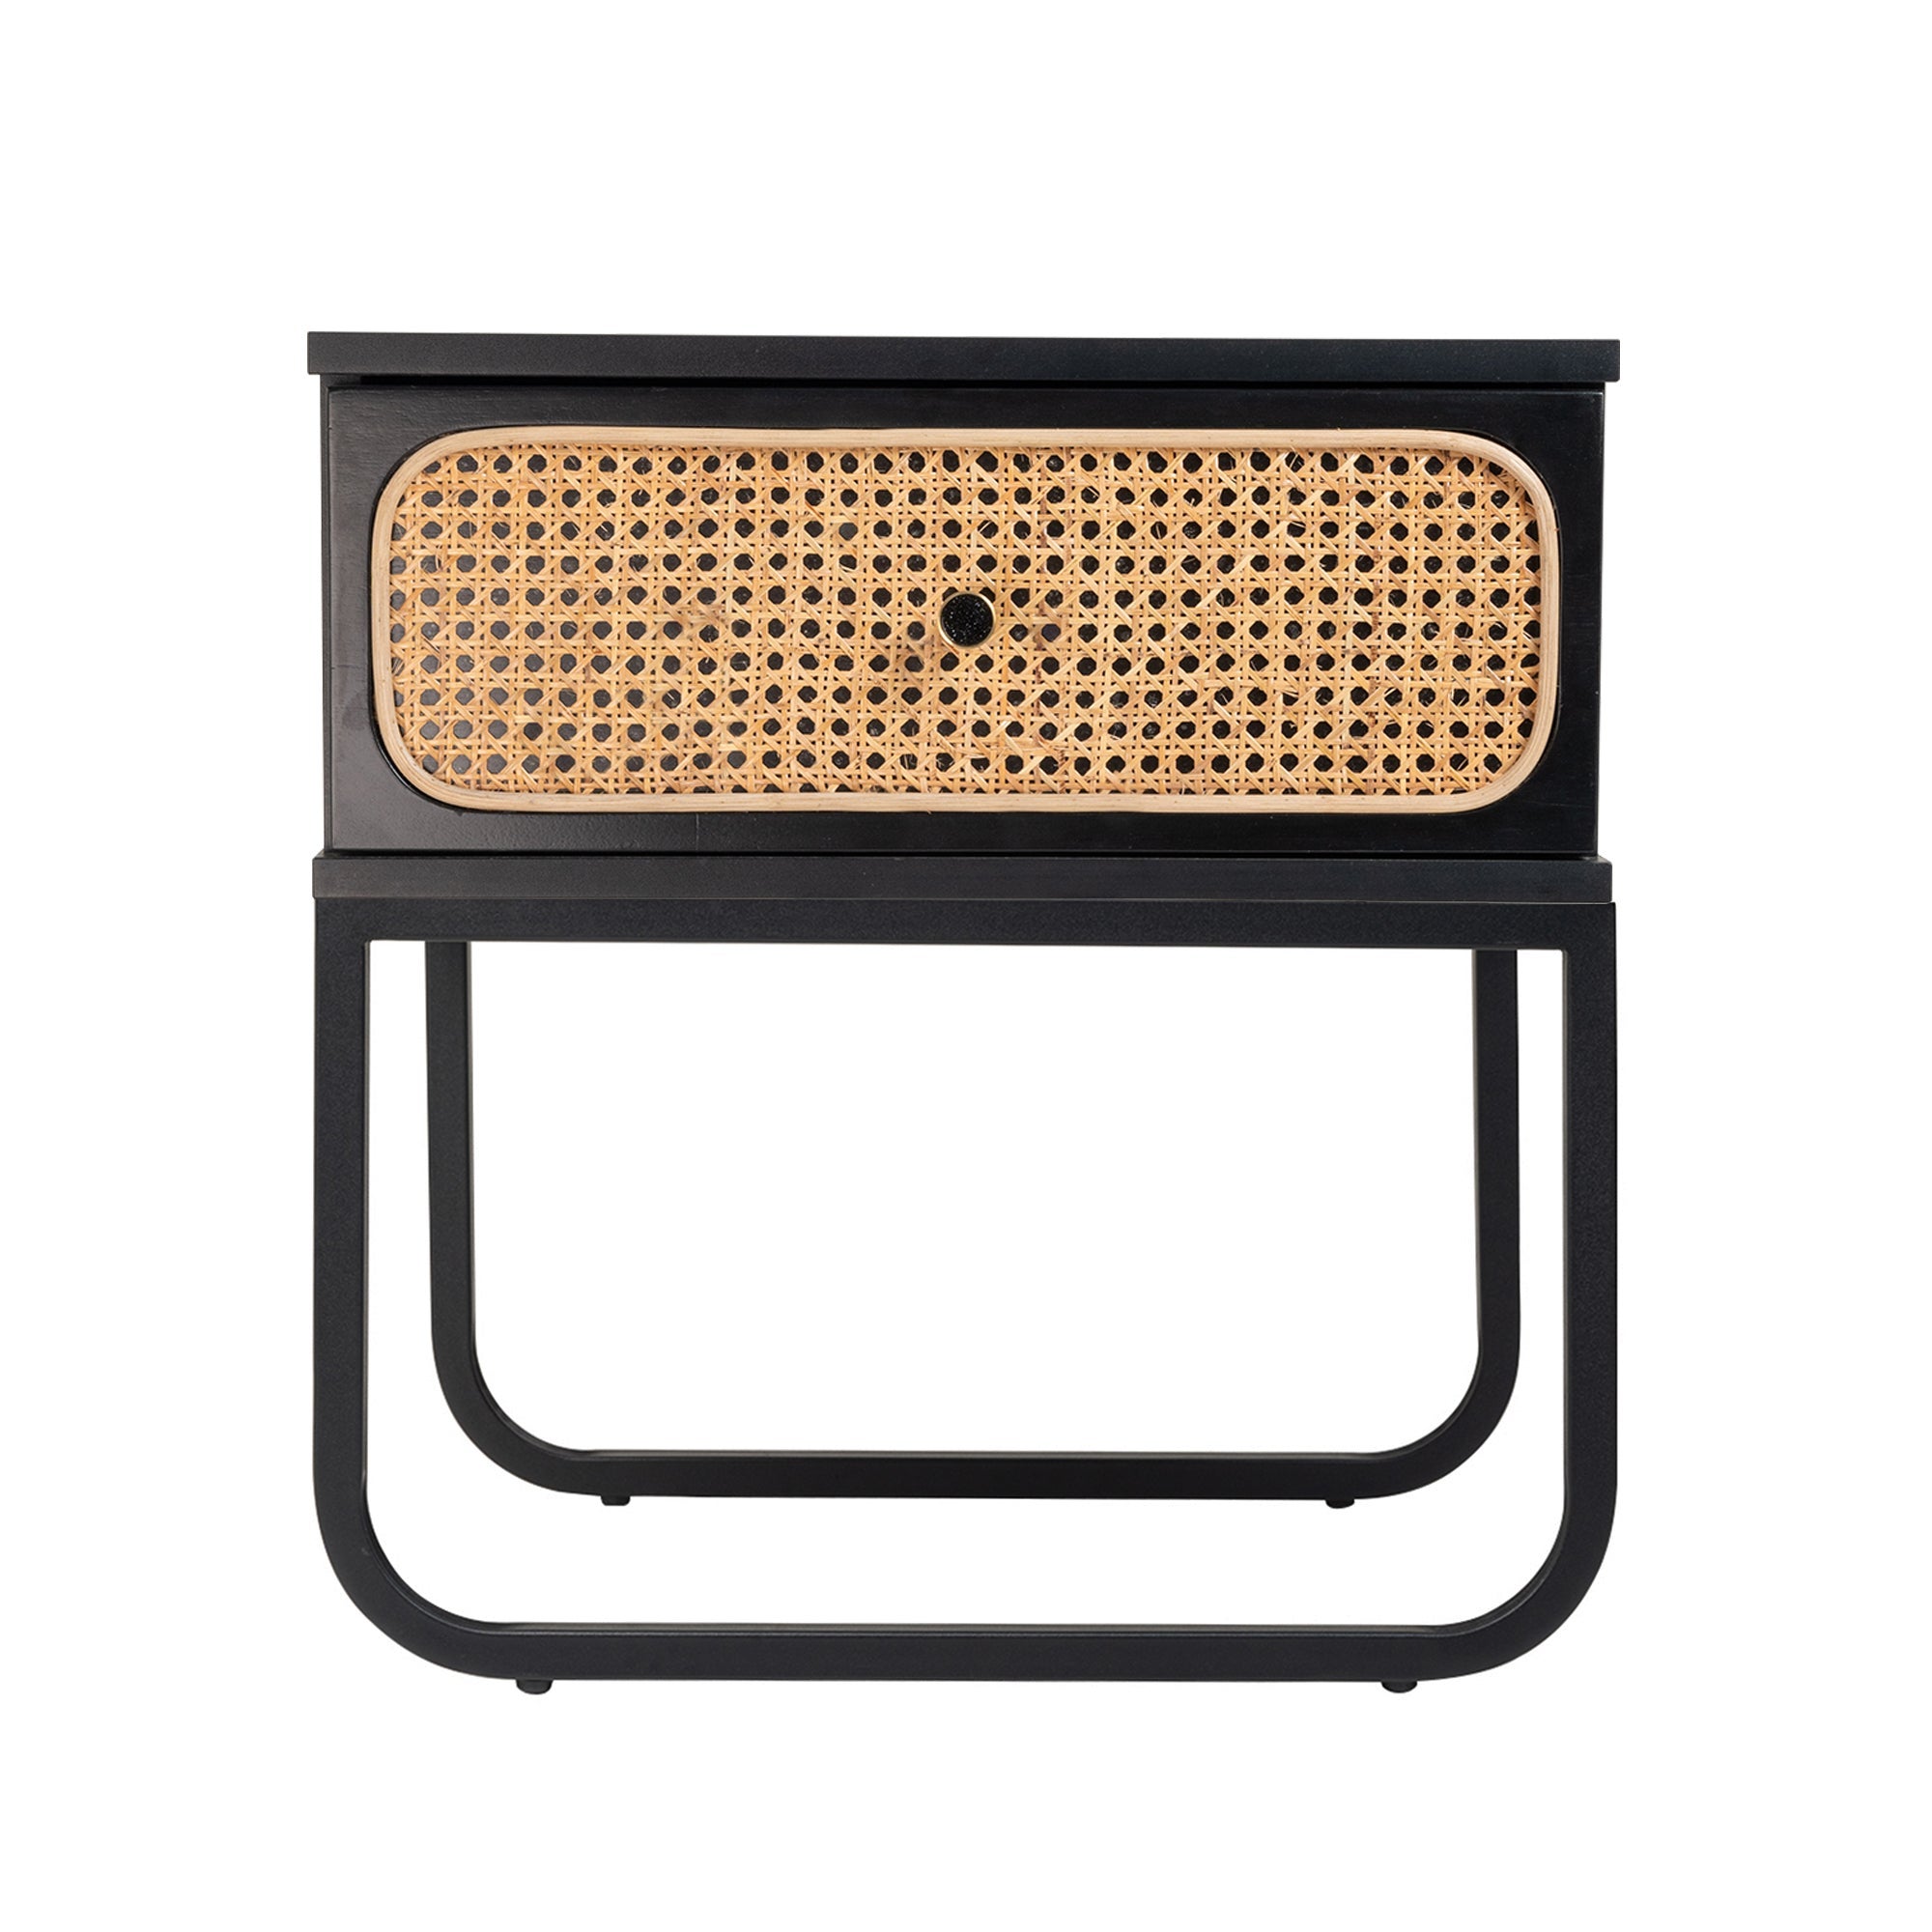 Mitra (Rattan) Bedside Table